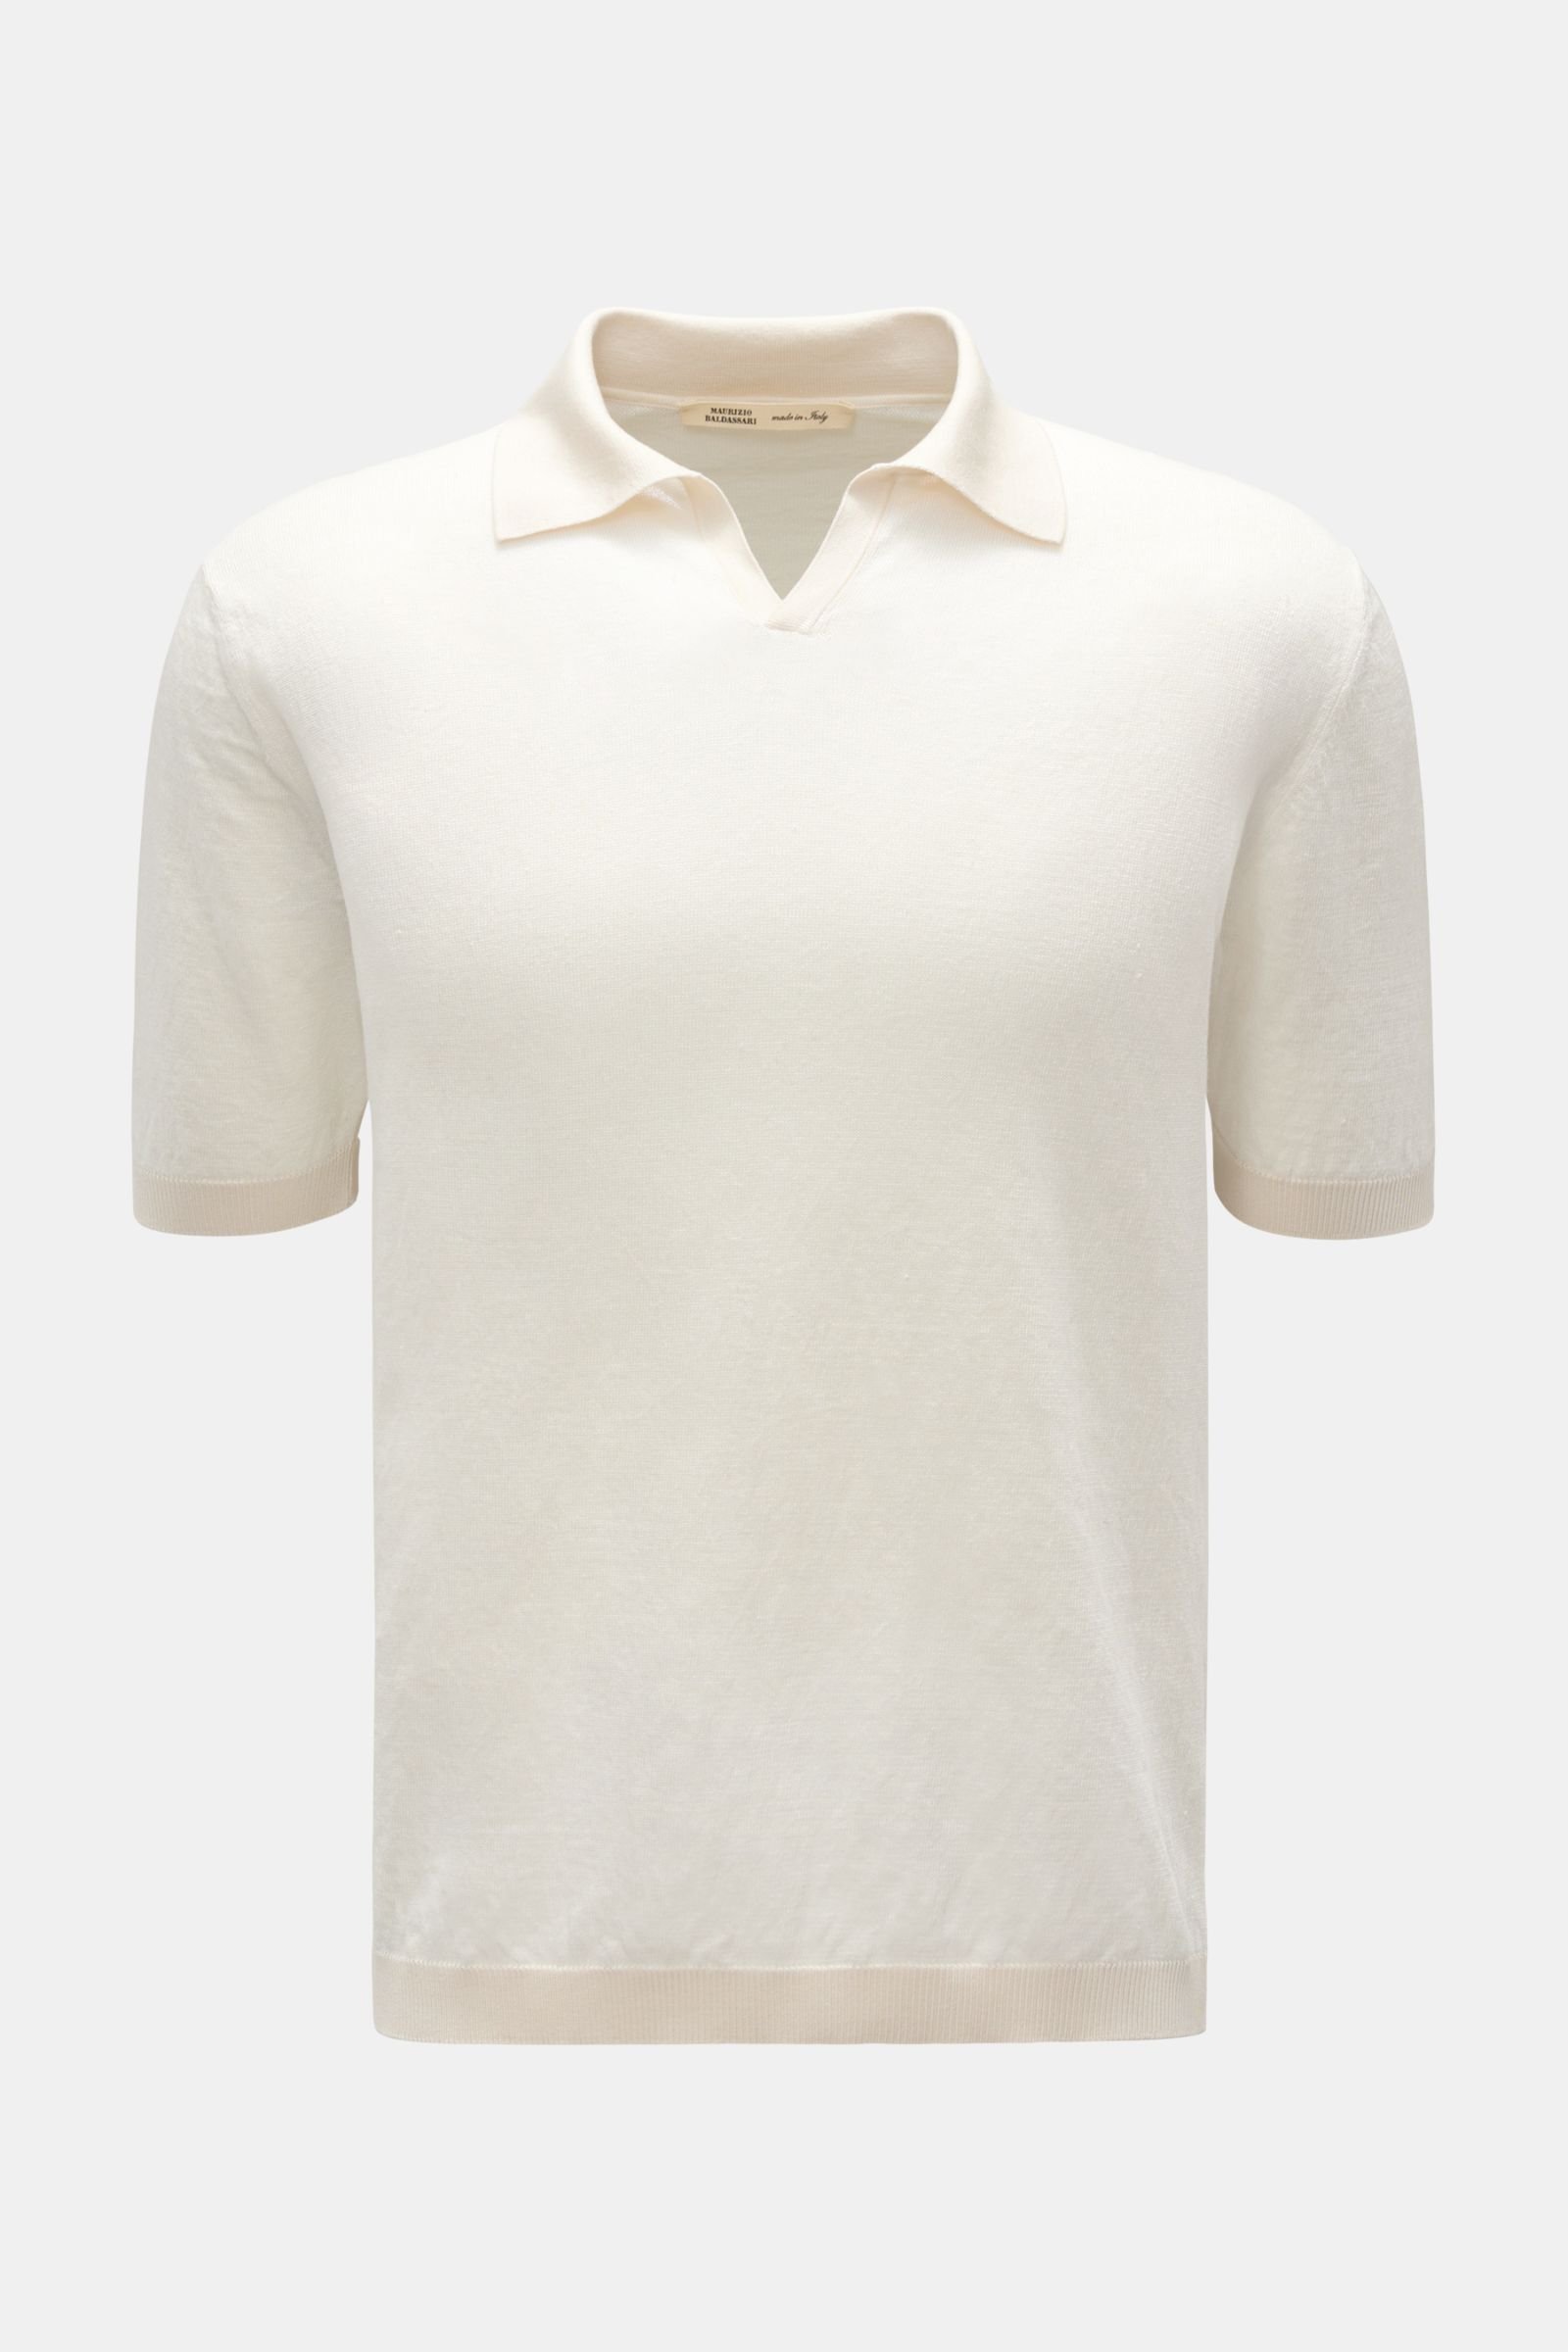 Linen short sleeve knit polo in off-white